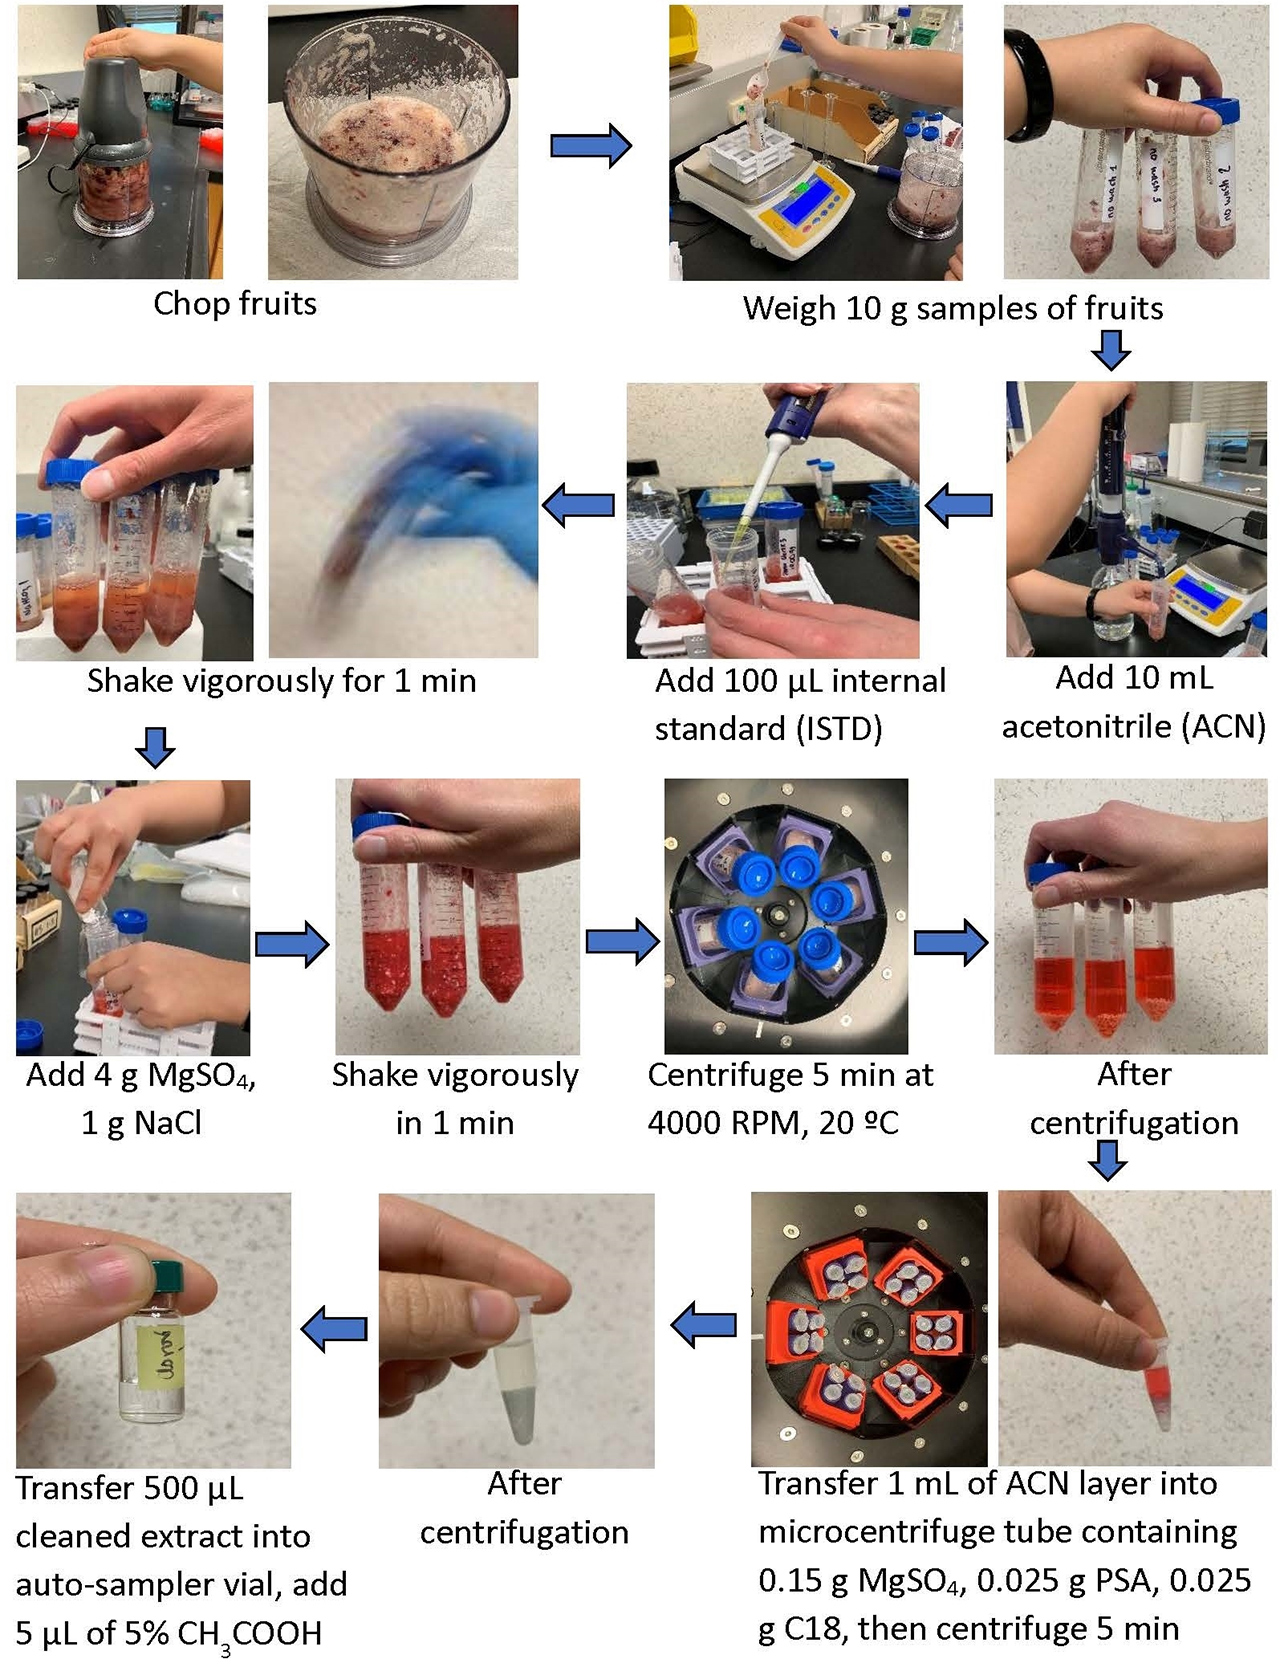 step-by-step procedure of sample preparation protocol called QuEChERS starting with fruit puree, weighing at a balance, adding reagents, shaking the vials, centrifugation and transfer to a small glass vial